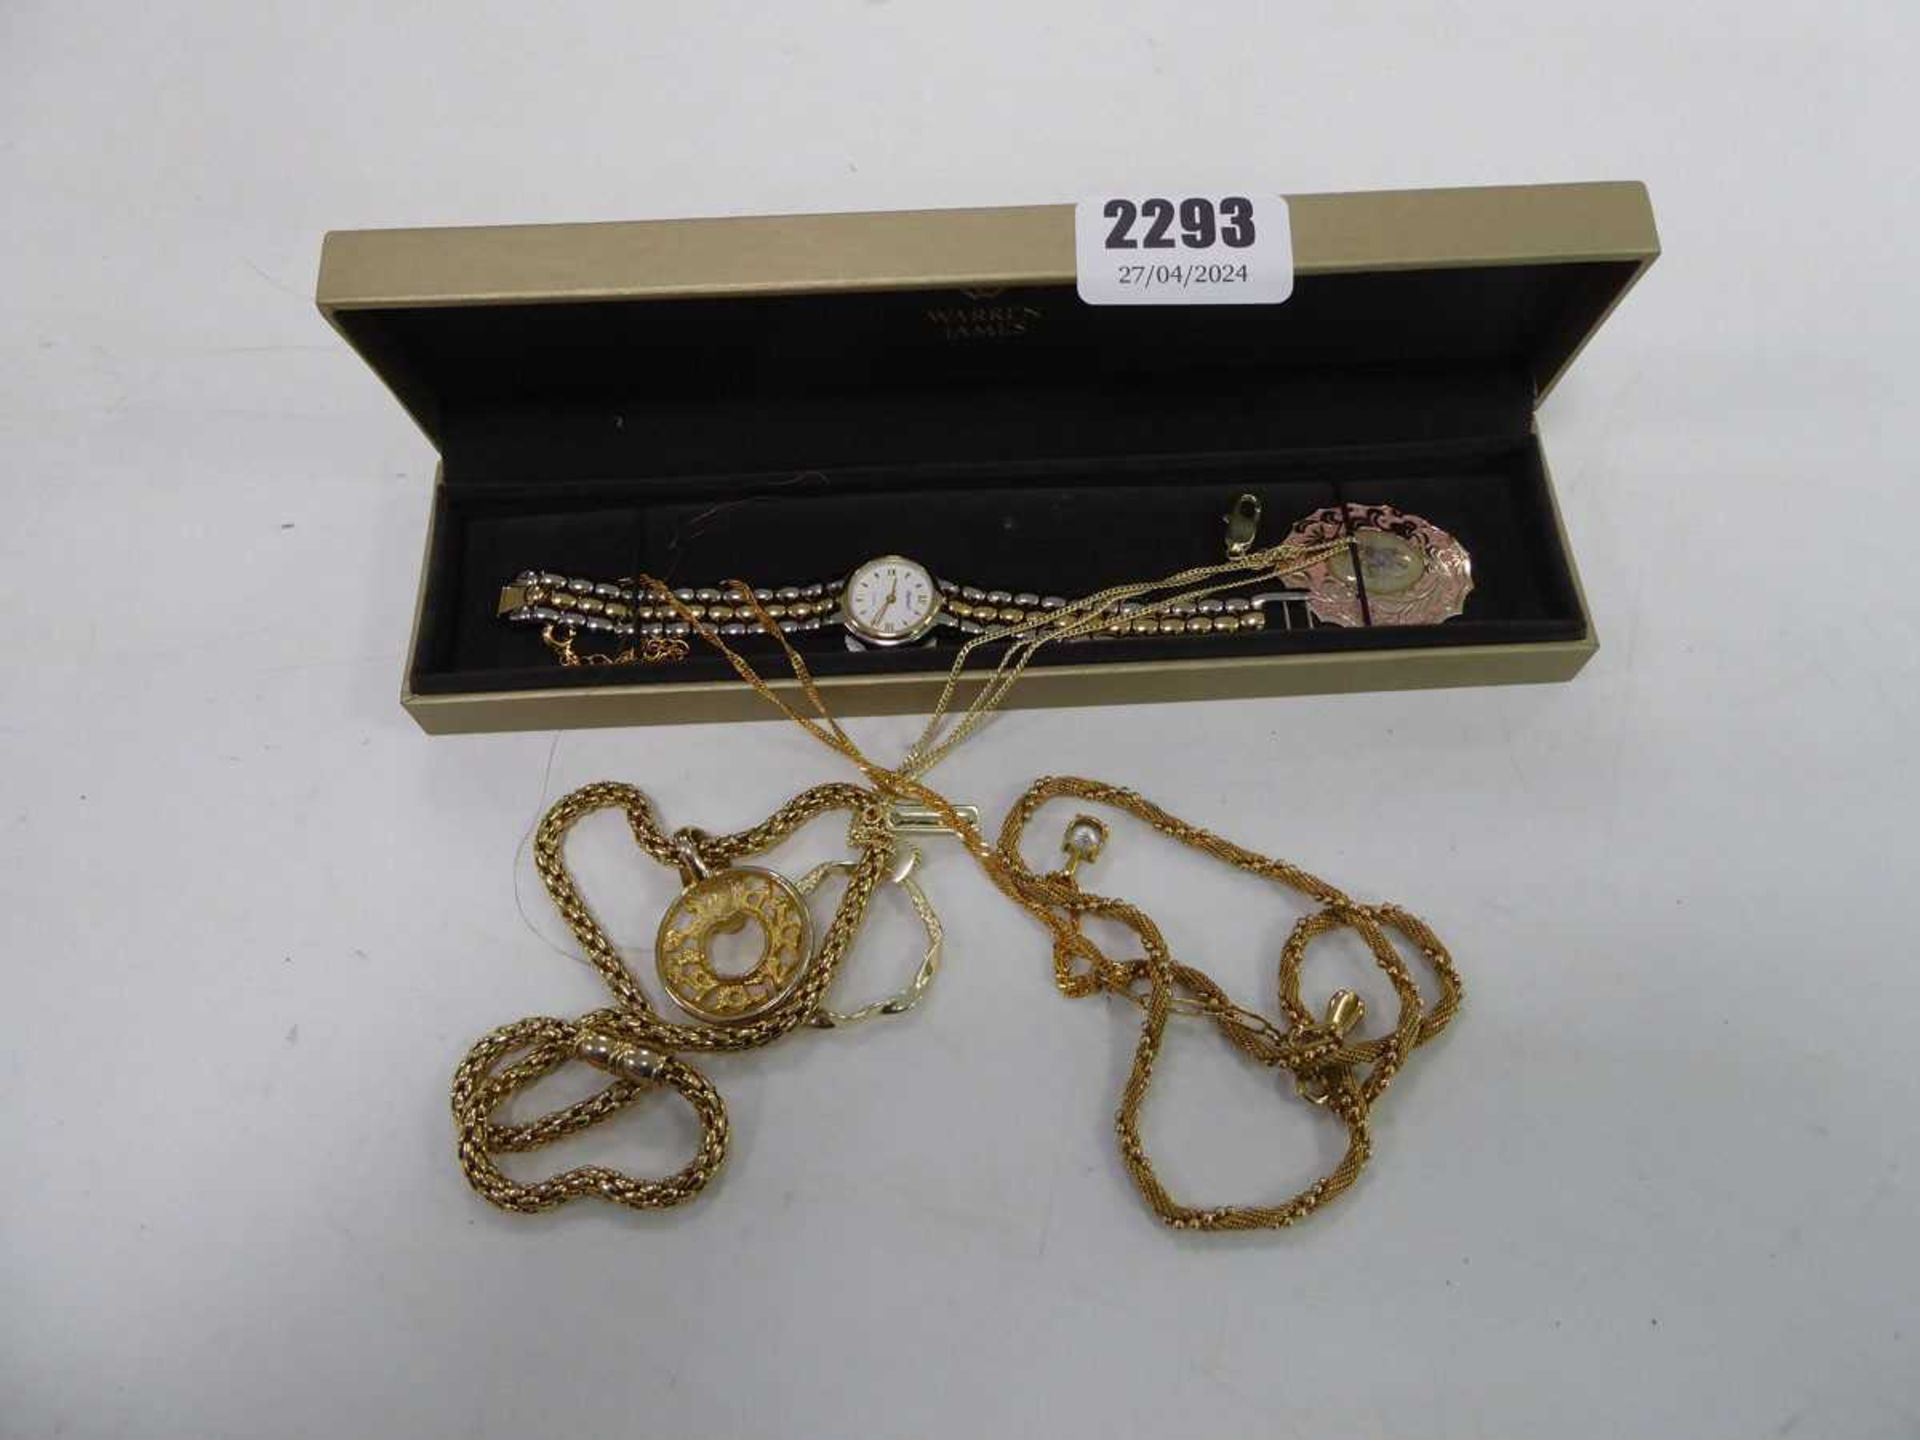 Yellow metal chain, watch, and brooch etc.